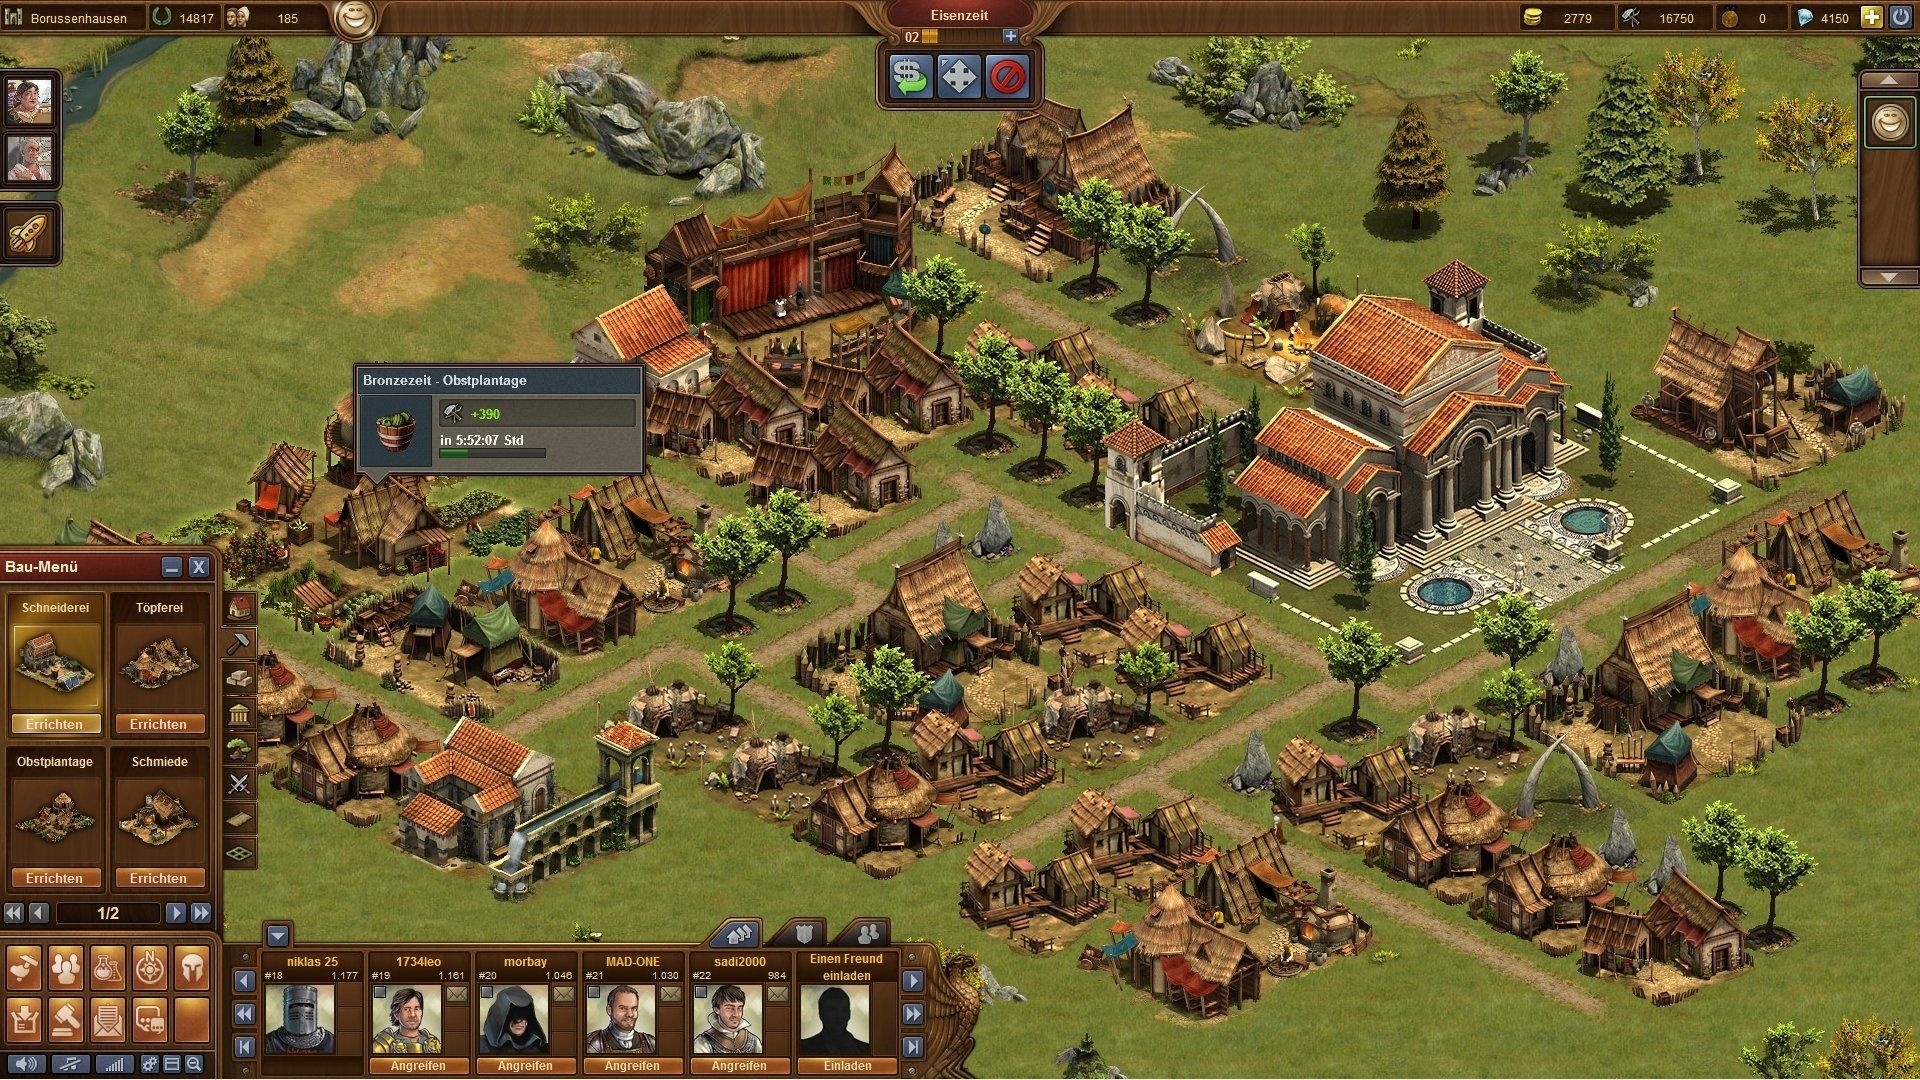 forge of empires login unblocked at school